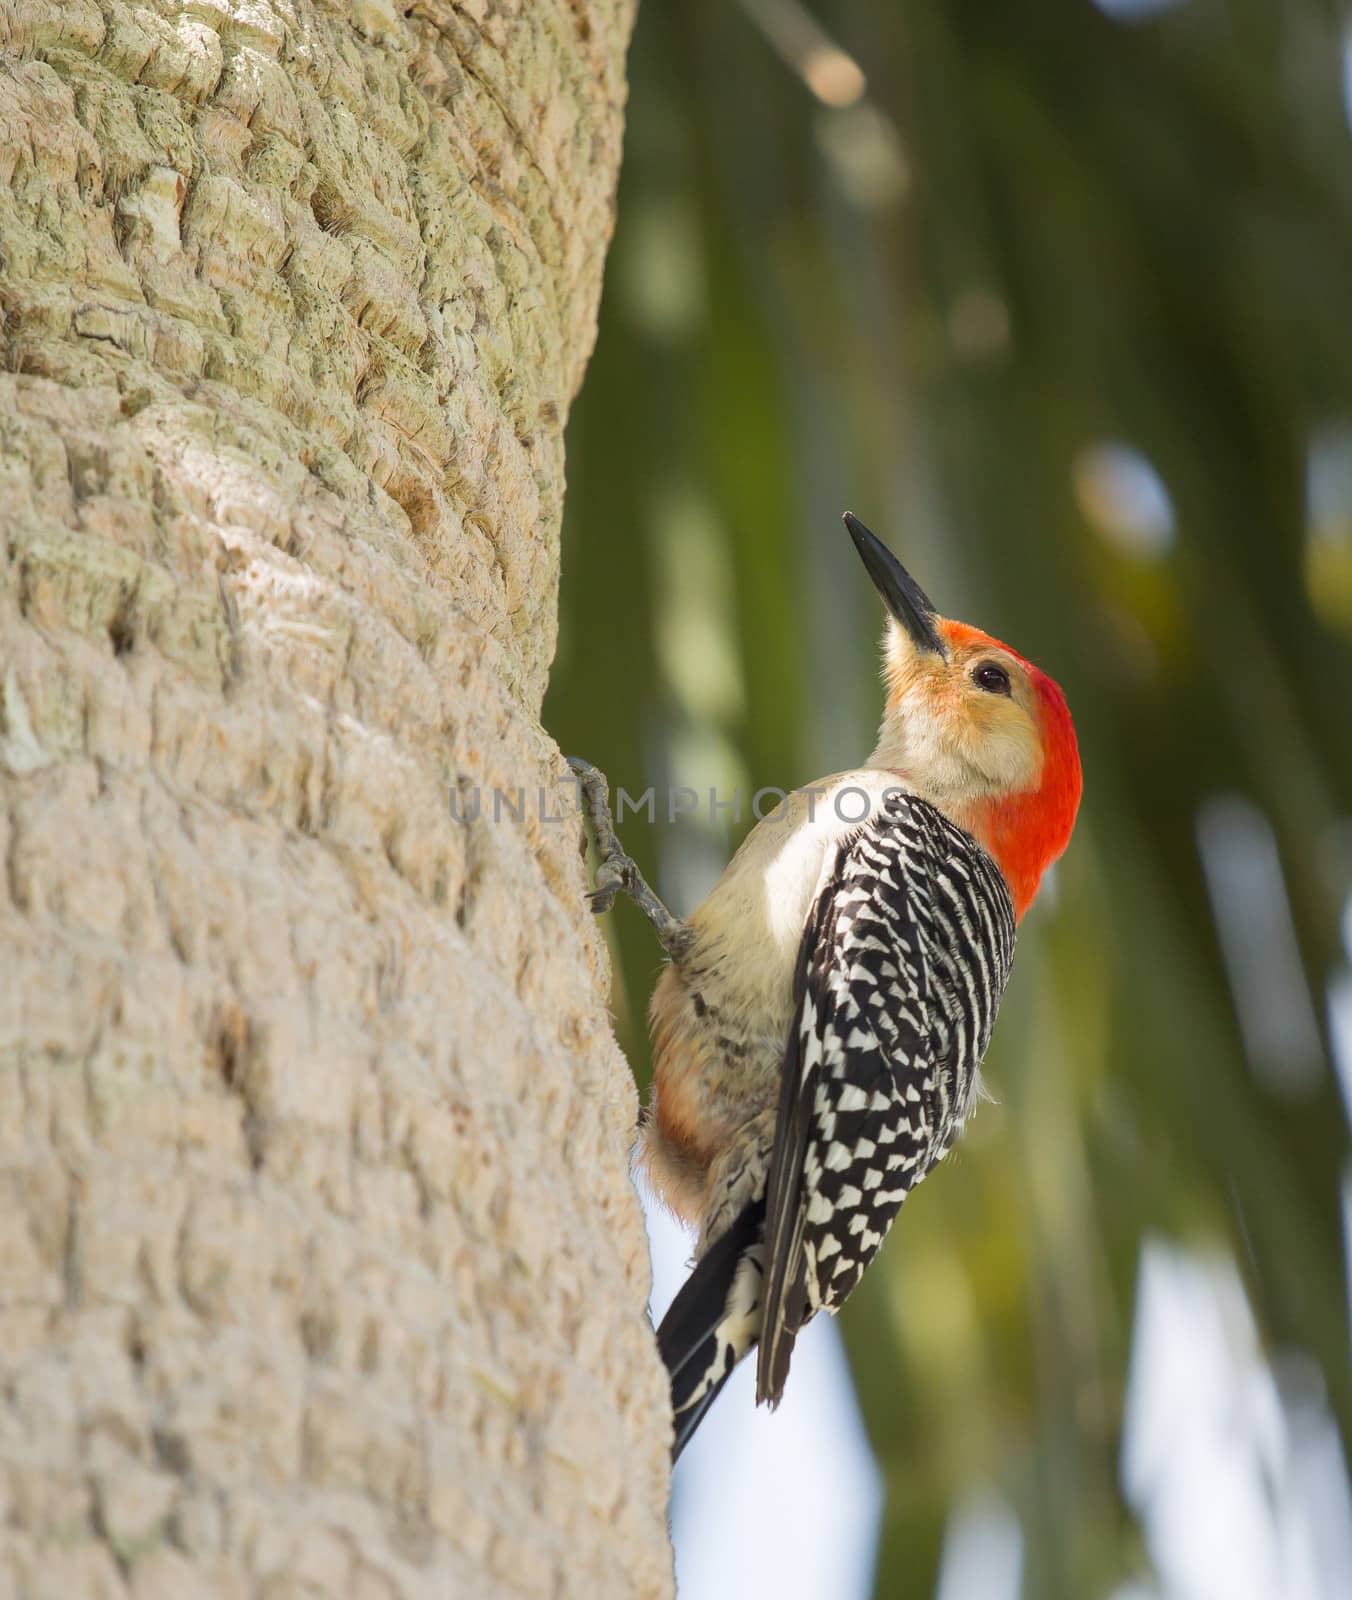 The Red Bellied Woodpecker Stare by picturyay